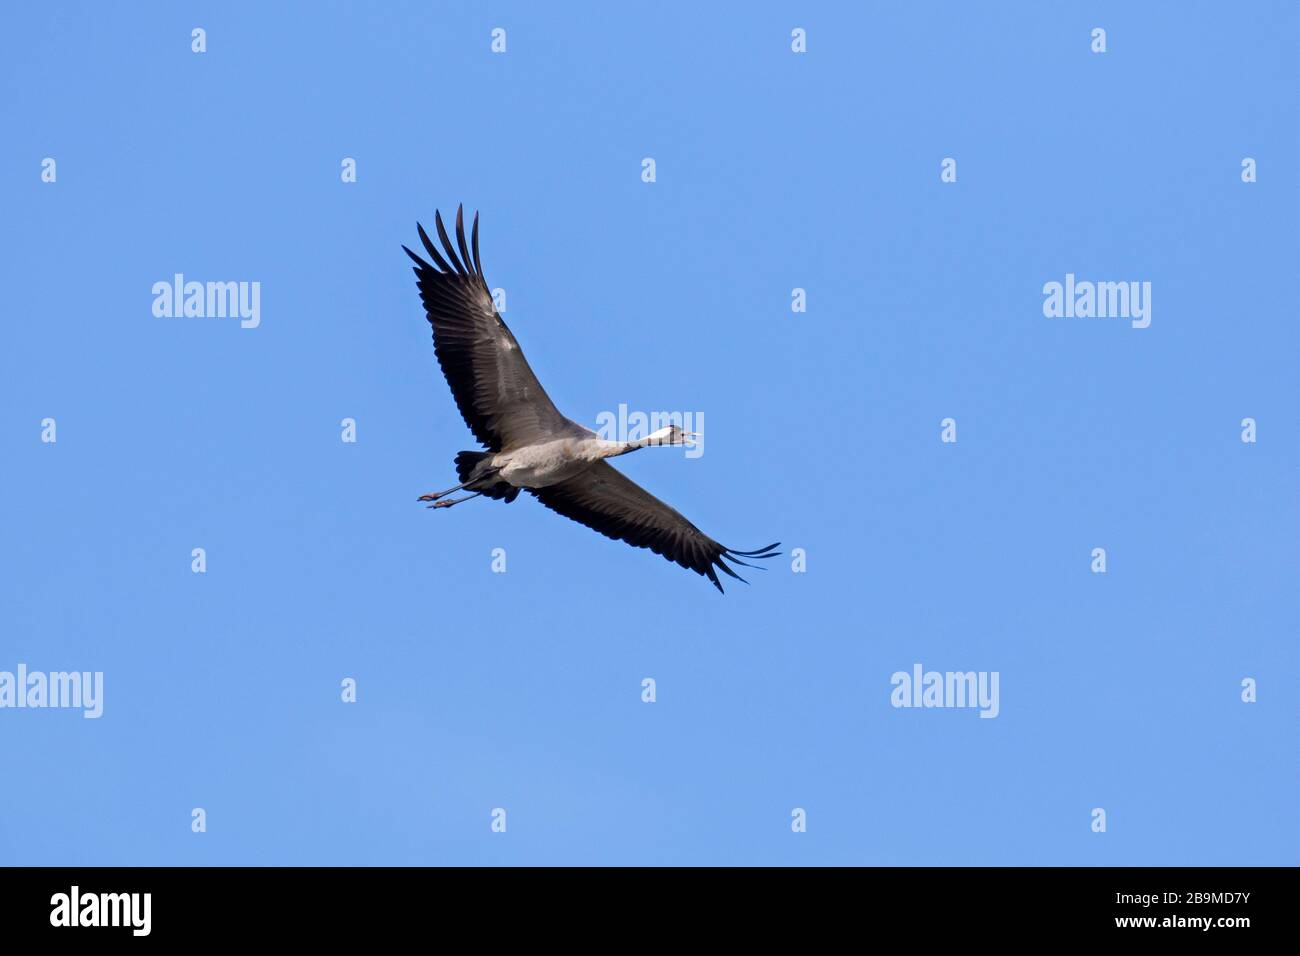 Migrating common crane / Eurasian crane (Grus grus) calling while flying / thermal soaring against blue sky during migration Stock Photo